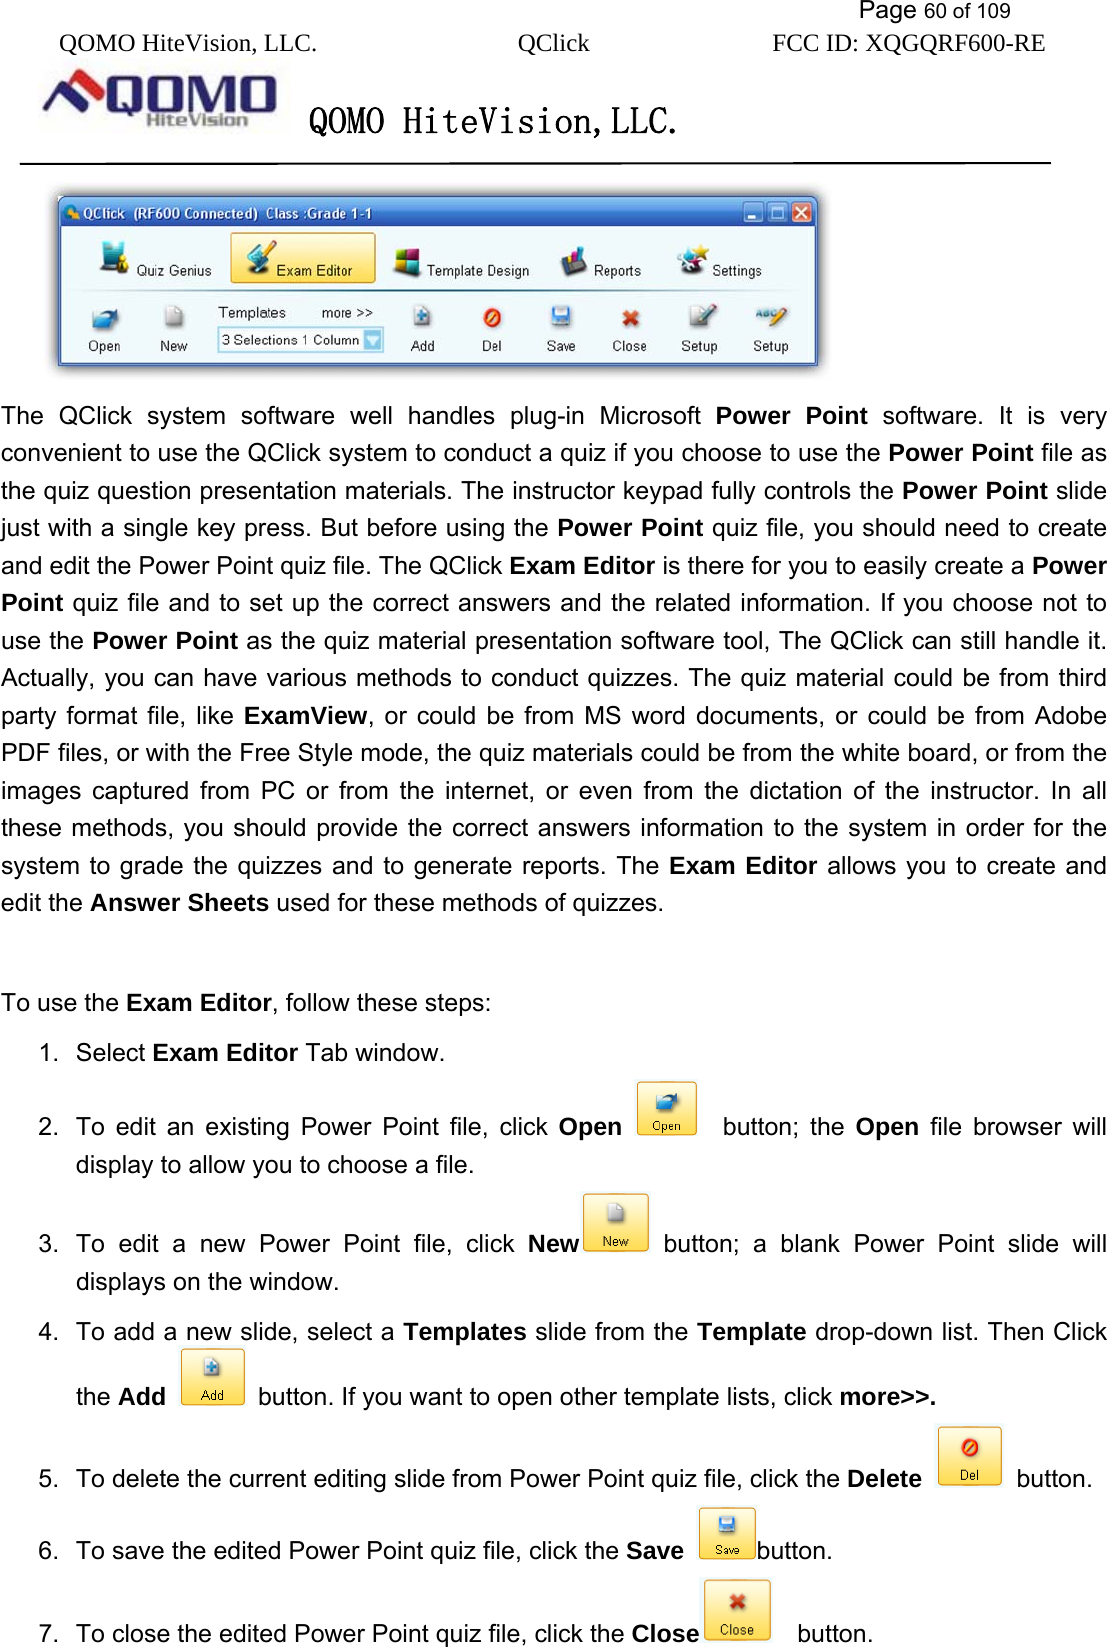           Page 60 of 109 QOMO HiteVision, LLC.  QClick        FCC ID: XQGQRF600-RE     QOMO HiteVision,LLC.    The QClick system software well handles plug-in Microsoft Power Point software. It is very convenient to use the QClick system to conduct a quiz if you choose to use the Power Point file as the quiz question presentation materials. The instructor keypad fully controls the Power Point slide just with a single key press. But before using the Power Point quiz file, you should need to create and edit the Power Point quiz file. The QClick Exam Editor is there for you to easily create a Power Point quiz file and to set up the correct answers and the related information. If you choose not to use the Power Point as the quiz material presentation software tool, The QClick can still handle it. Actually, you can have various methods to conduct quizzes. The quiz material could be from third party format file, like ExamView, or could be from MS word documents, or could be from Adobe PDF files, or with the Free Style mode, the quiz materials could be from the white board, or from the images captured from PC or from the internet, or even from the dictation of the instructor. In all these methods, you should provide the correct answers information to the system in order for the system to grade the quizzes and to generate reports. The Exam Editor allows you to create and edit the Answer Sheets used for these methods of quizzes.    To use the Exam Editor, follow these steps: 1. Select Exam Editor Tab window. 2.  To edit an existing Power Point file, click Open   button; the Open file browser will display to allow you to choose a file. 3.  To edit a new Power Point file, click New  button; a blank Power Point slide will displays on the window. 4.  To add a new slide, select a Templates slide from the Template drop-down list. Then Click the Add   button. If you want to open other template lists, click more&gt;&gt;. 5.  To delete the current editing slide from Power Point quiz file, click the Delete  button. 6.  To save the edited Power Point quiz file, click the Save button. 7.  To close the edited Power Point quiz file, click the Close   button. 